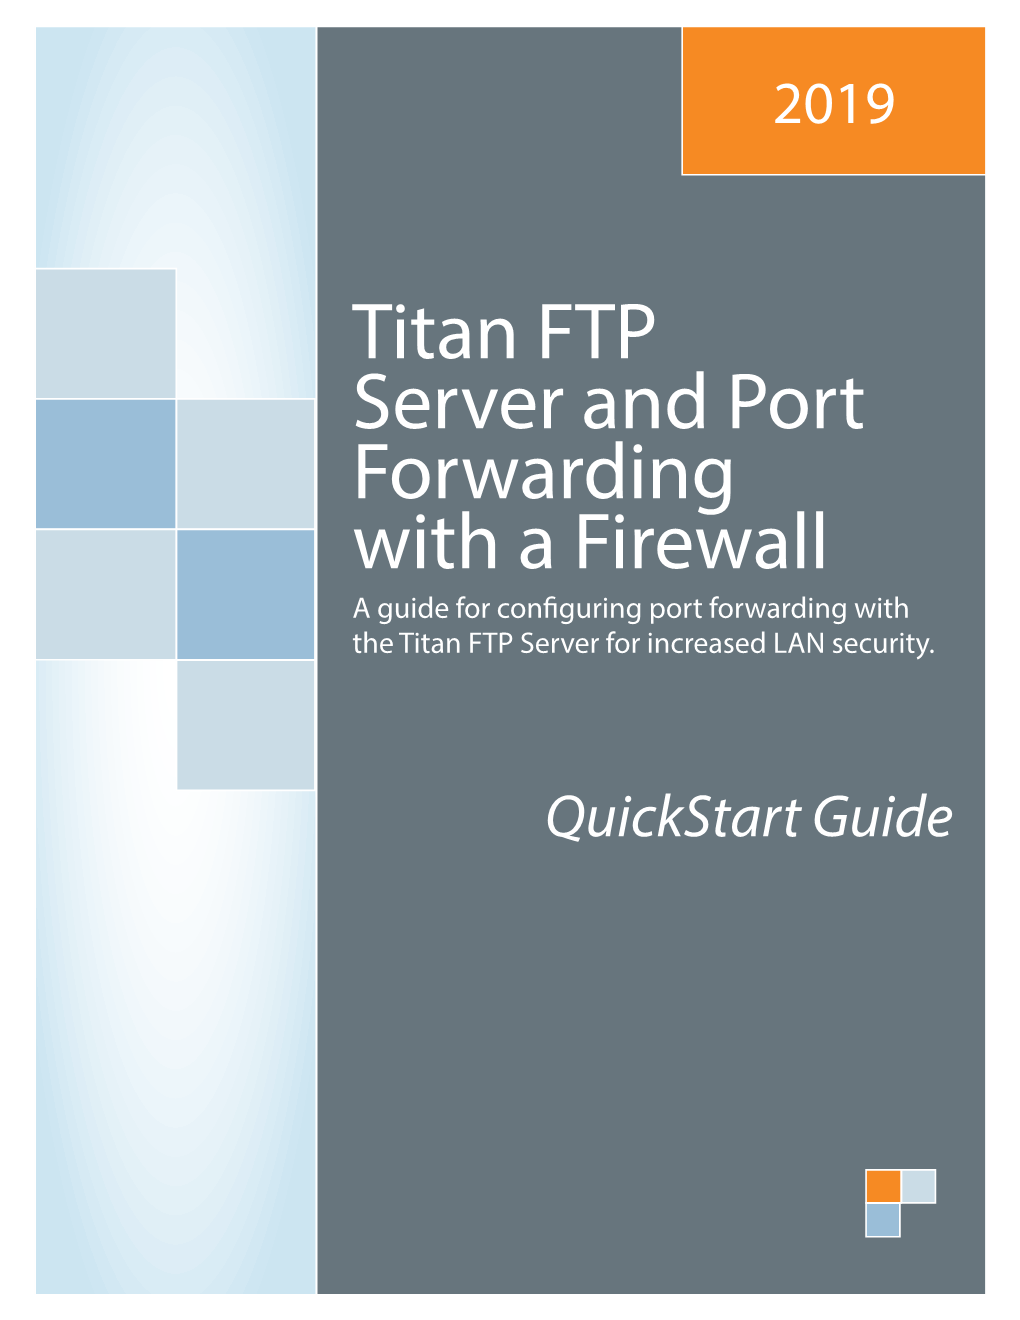 Titan FTP Server and Port Forwarding with a Firewall a Guide for Configuring Port Forwarding with the Titan FTP Server for Increased LAN Security